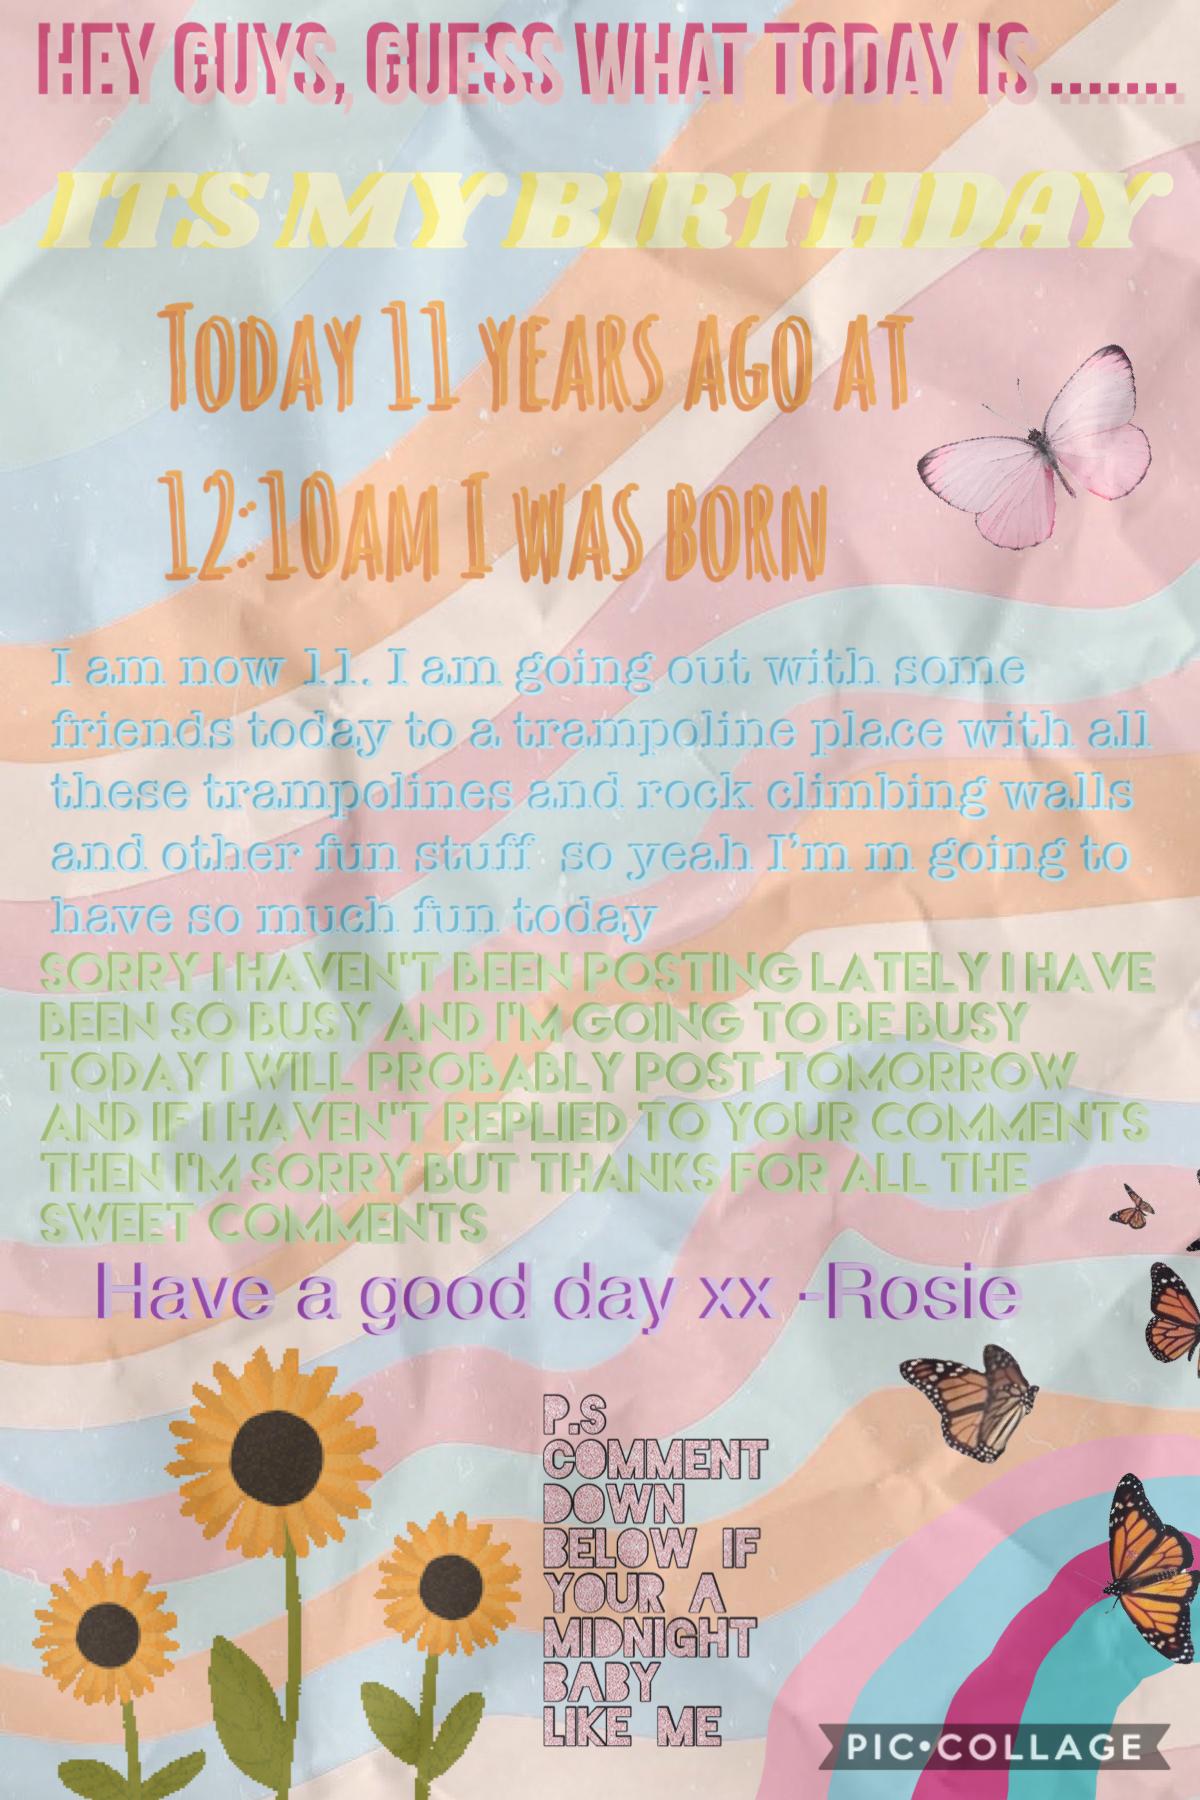 !!Hey guys!!
I’m now 11 it’s my bday 
It was actually my bday yesterday I was meant to post this yesterday but I was so busy I forgot to post it 